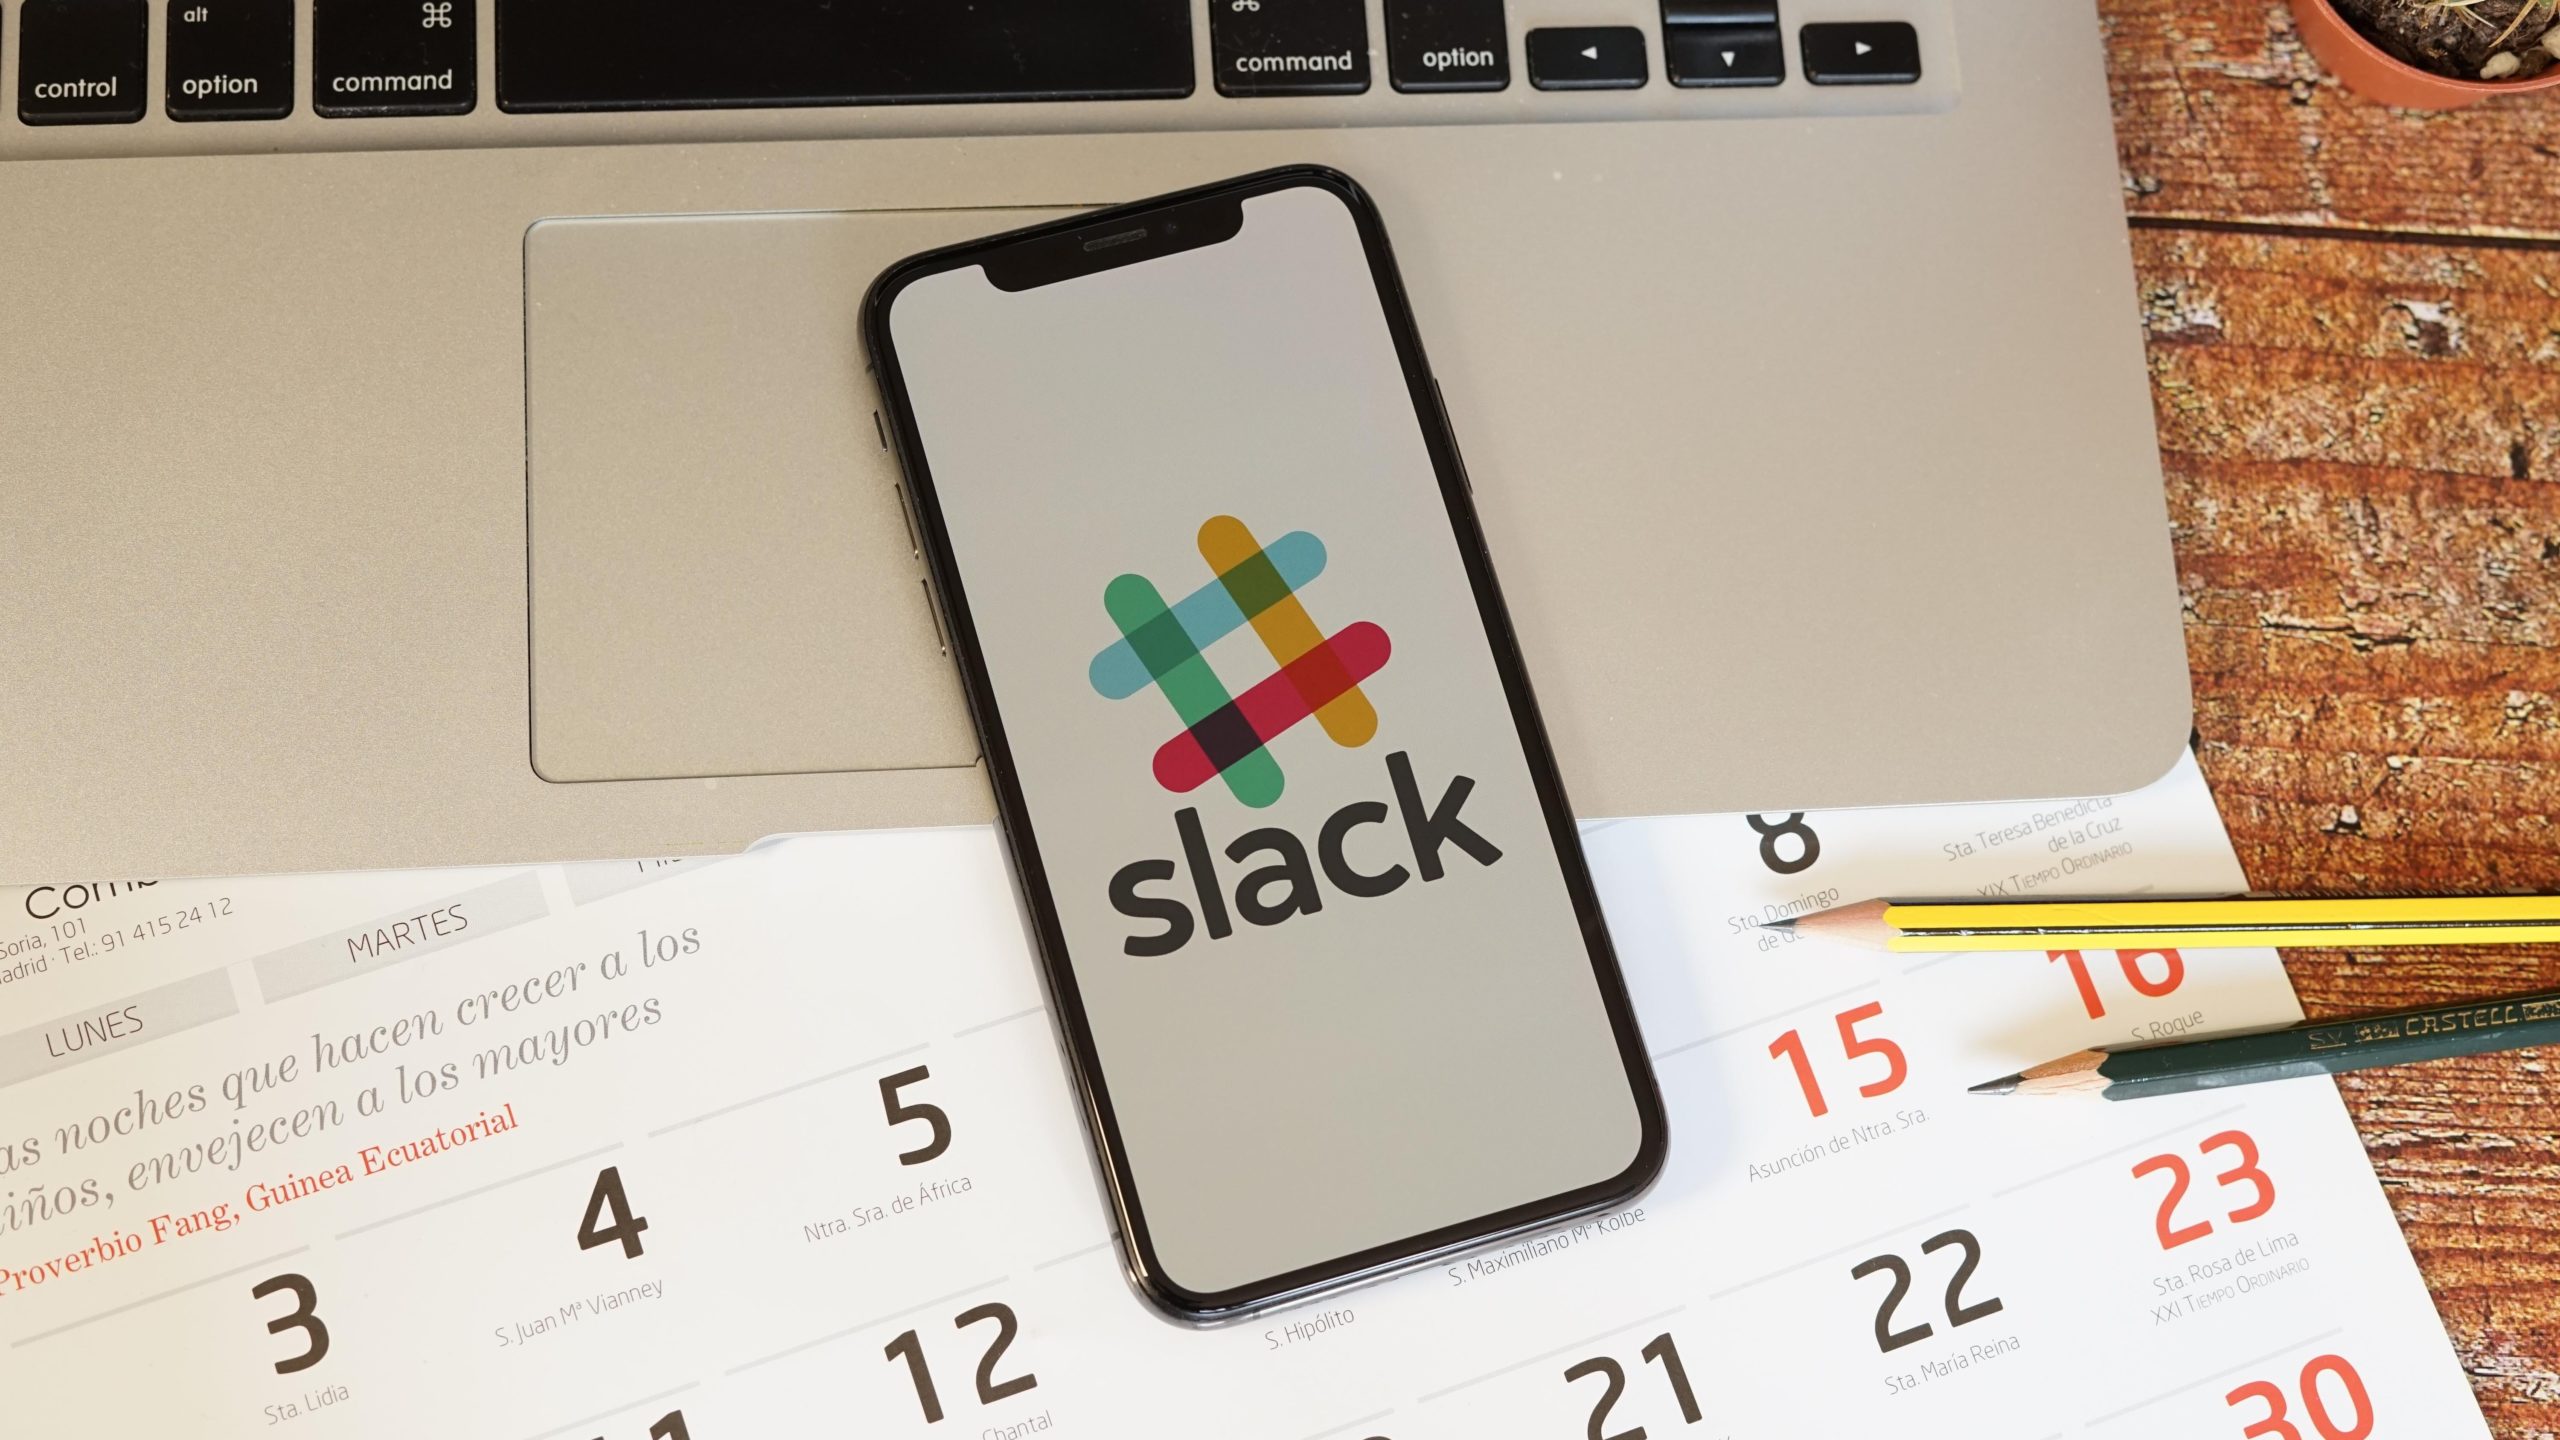 9 Slack Customisations You Should Try to Make Work Easier (or More Fun)